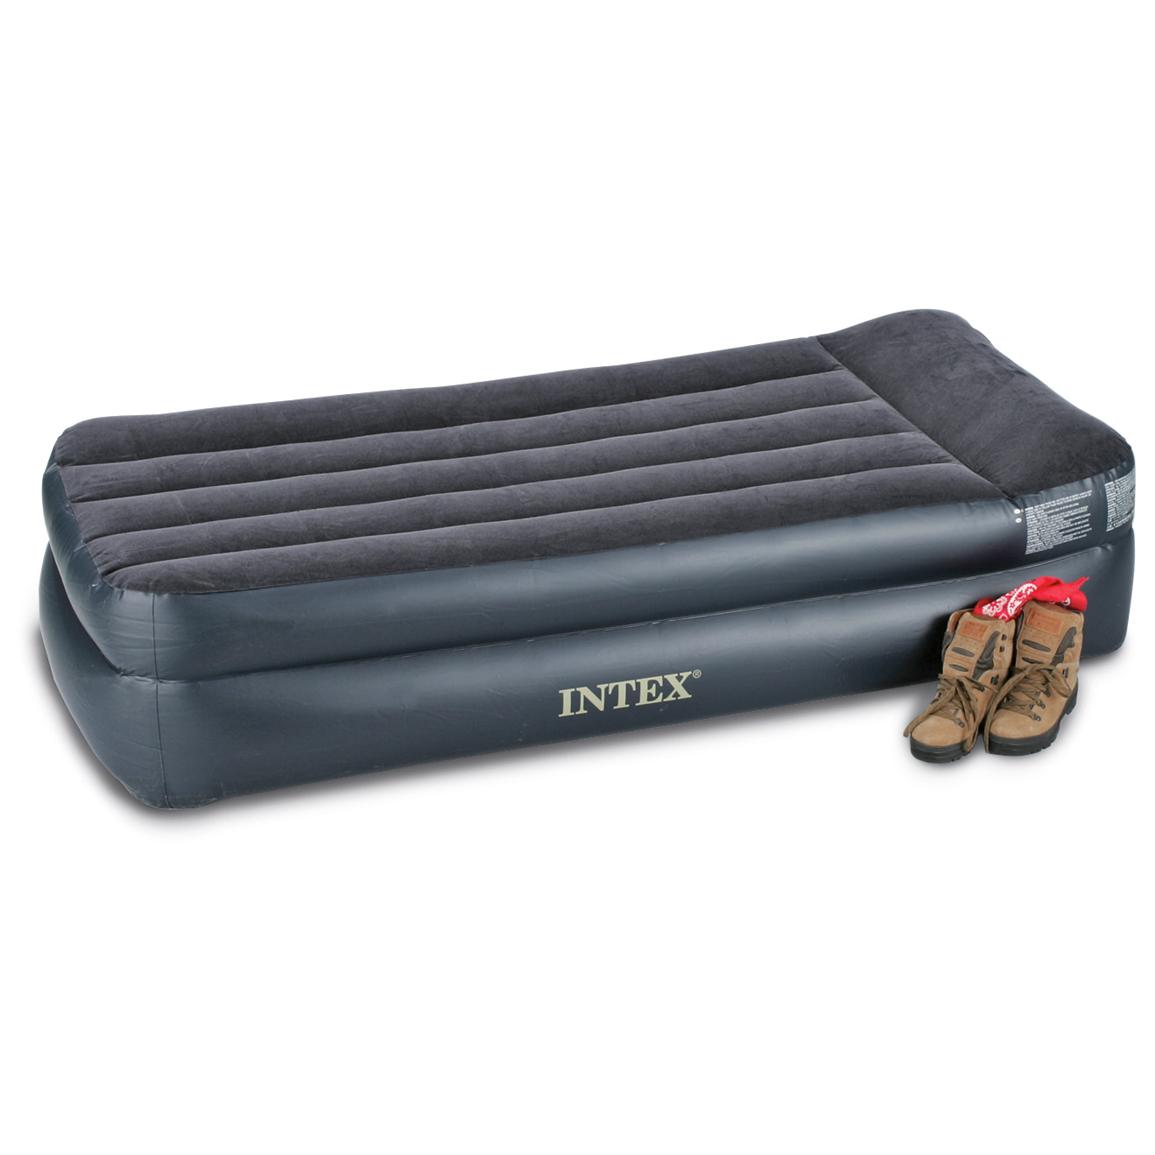 Intex Twin Air Bed Mattress with Built-In Electric Pump - 131678, Air Beds at Sportsman's Guide